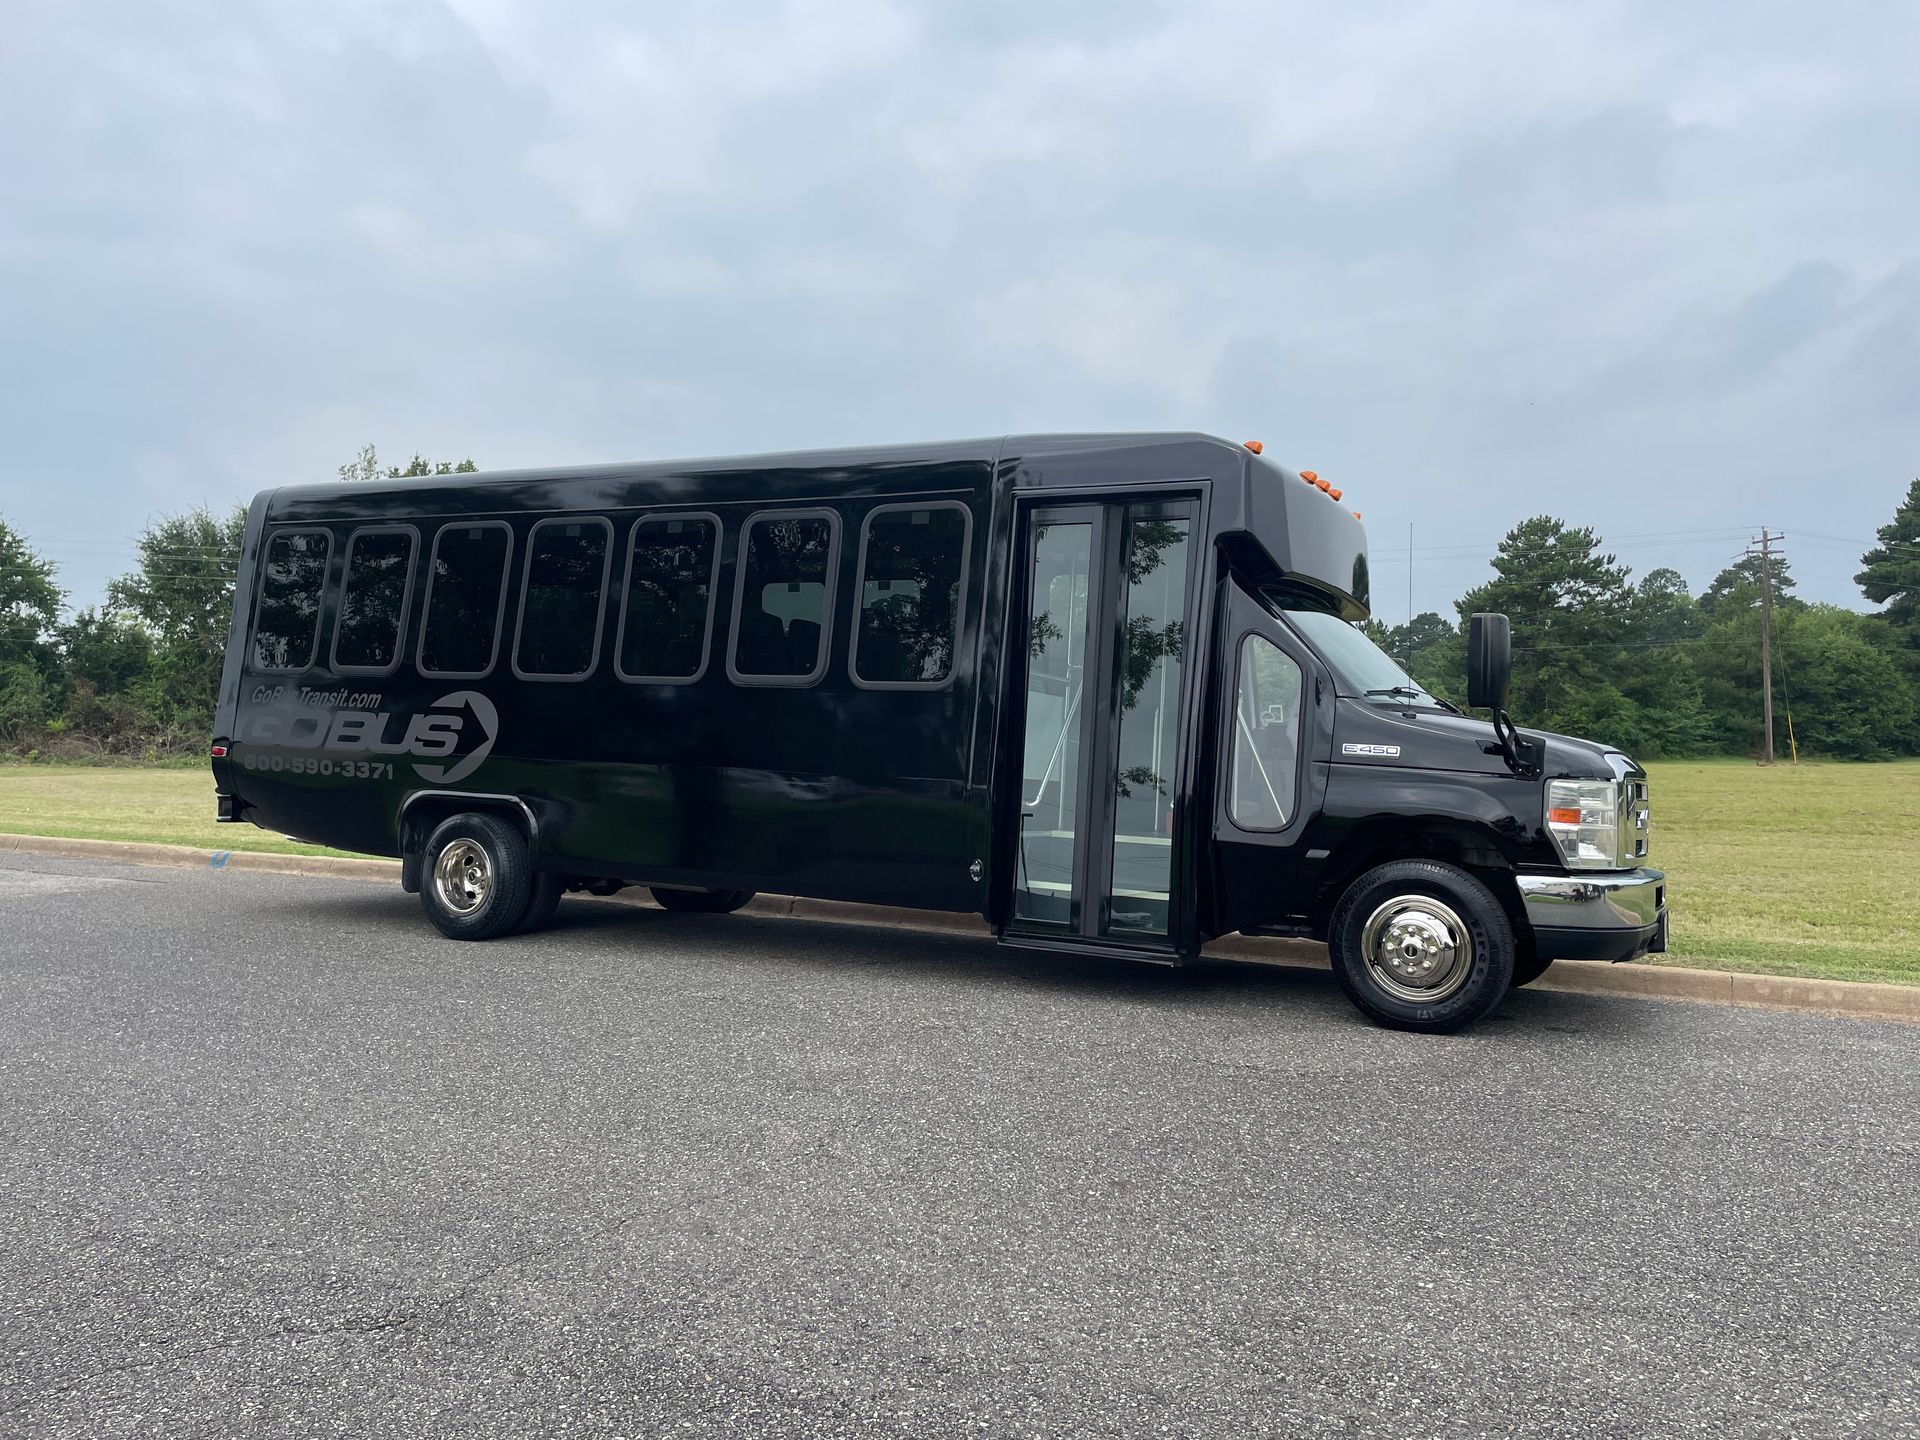 A black bus is parked on the side of the road.